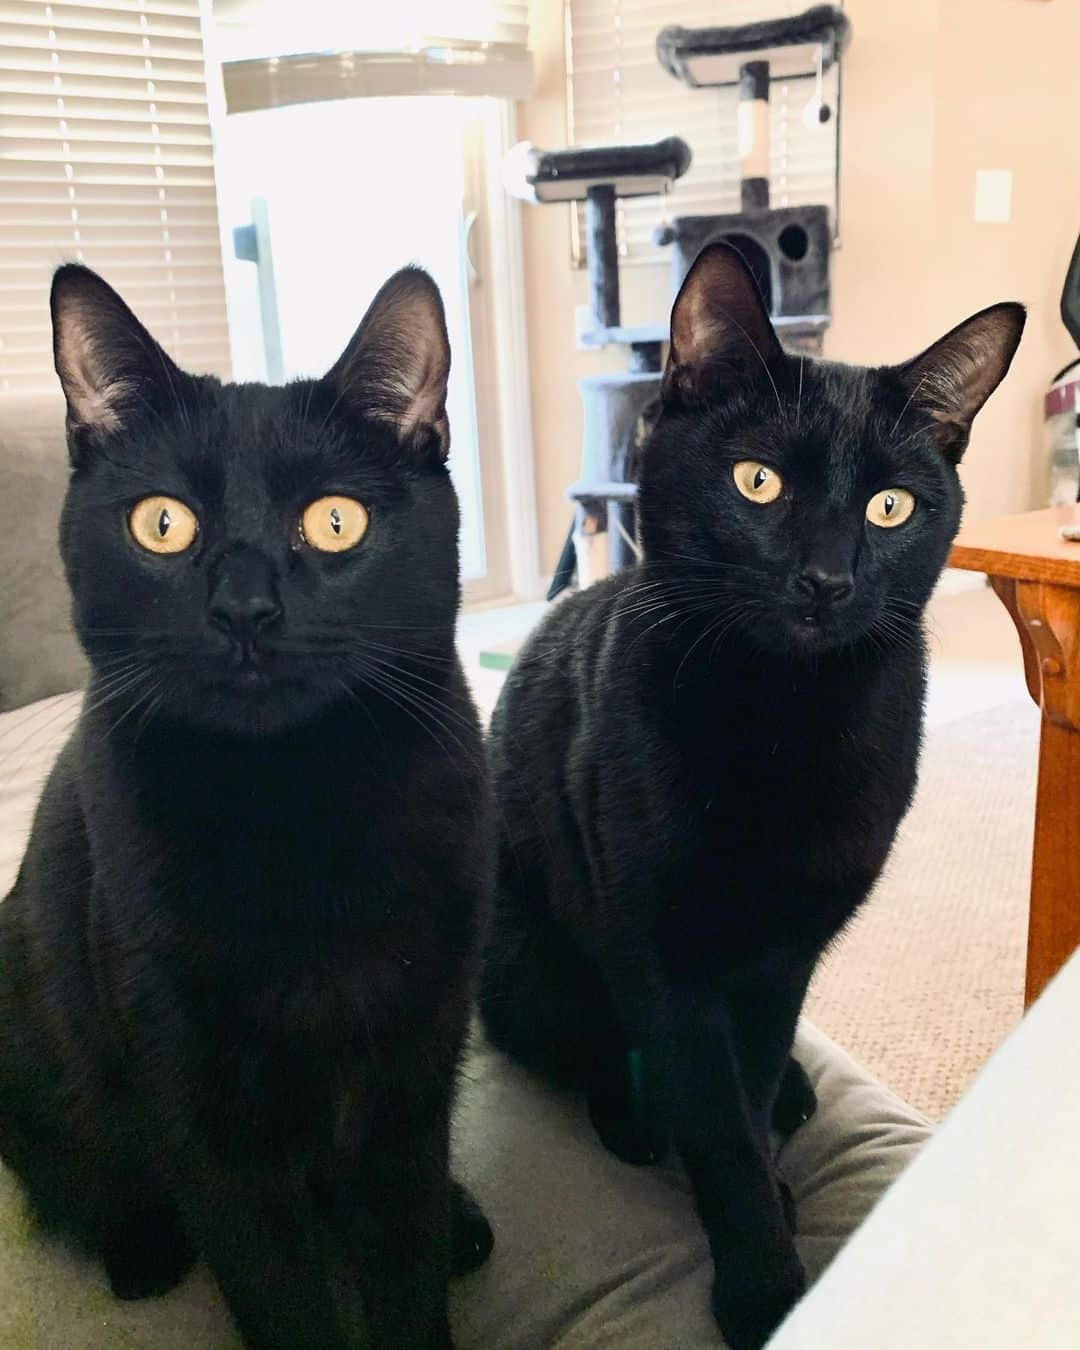 two black cats sitting and looking at camera